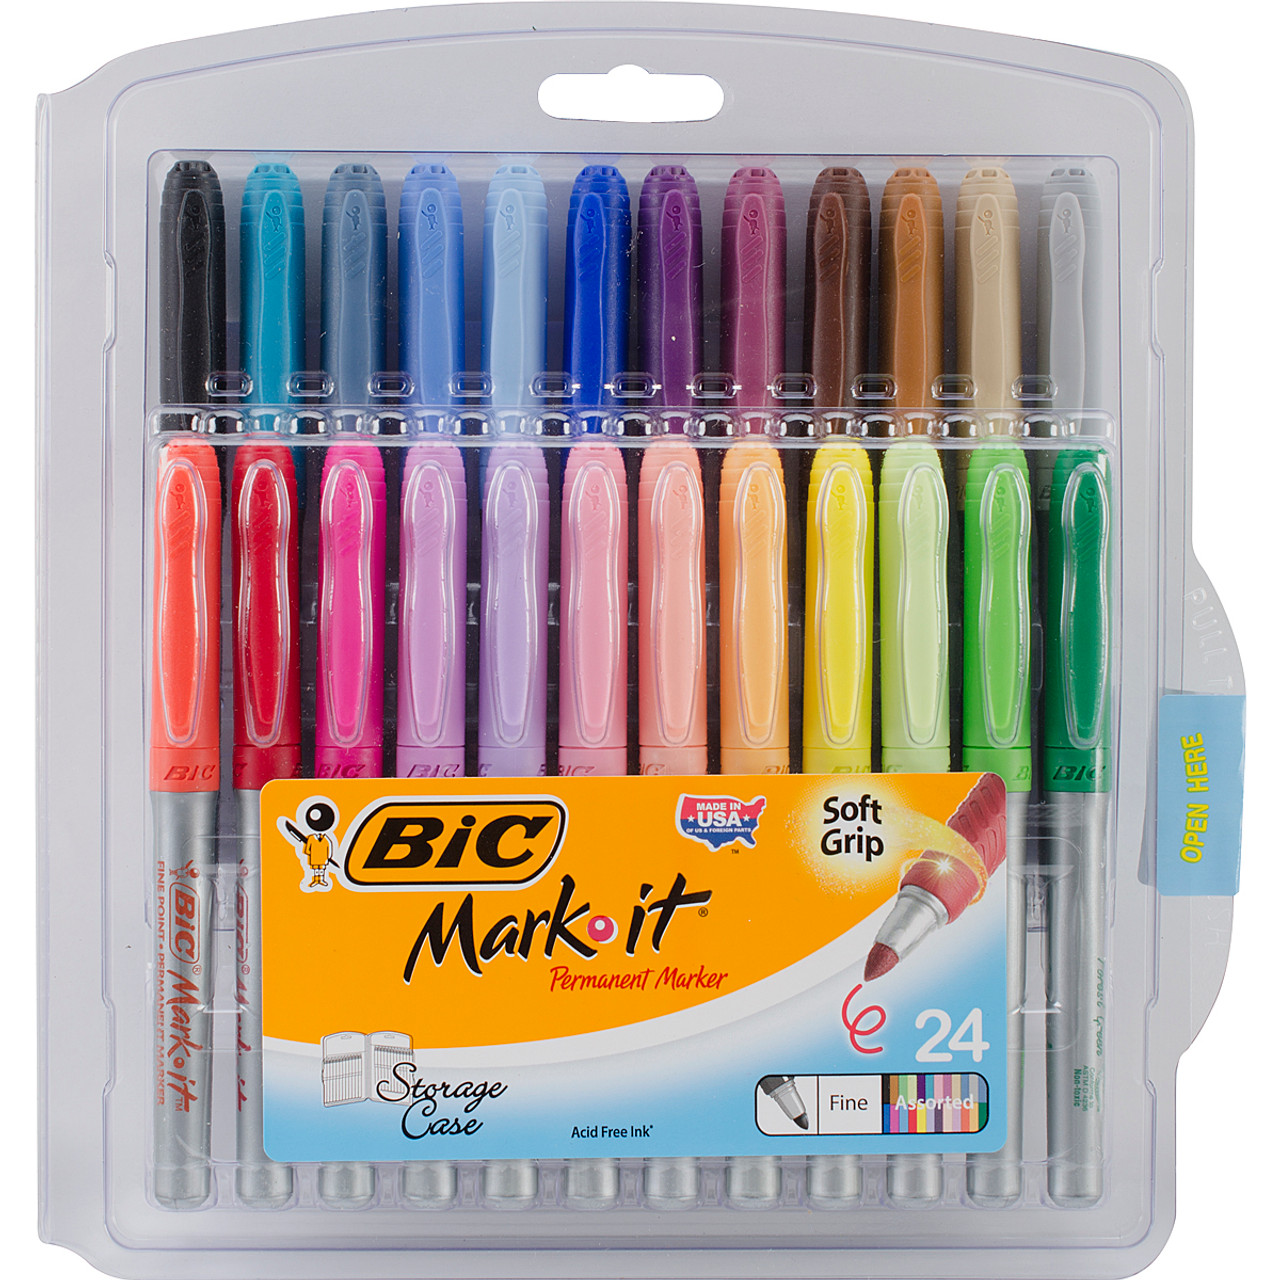 Basics Fine Point Tip Permanent Markers - Assorted Colors, 24-Pack